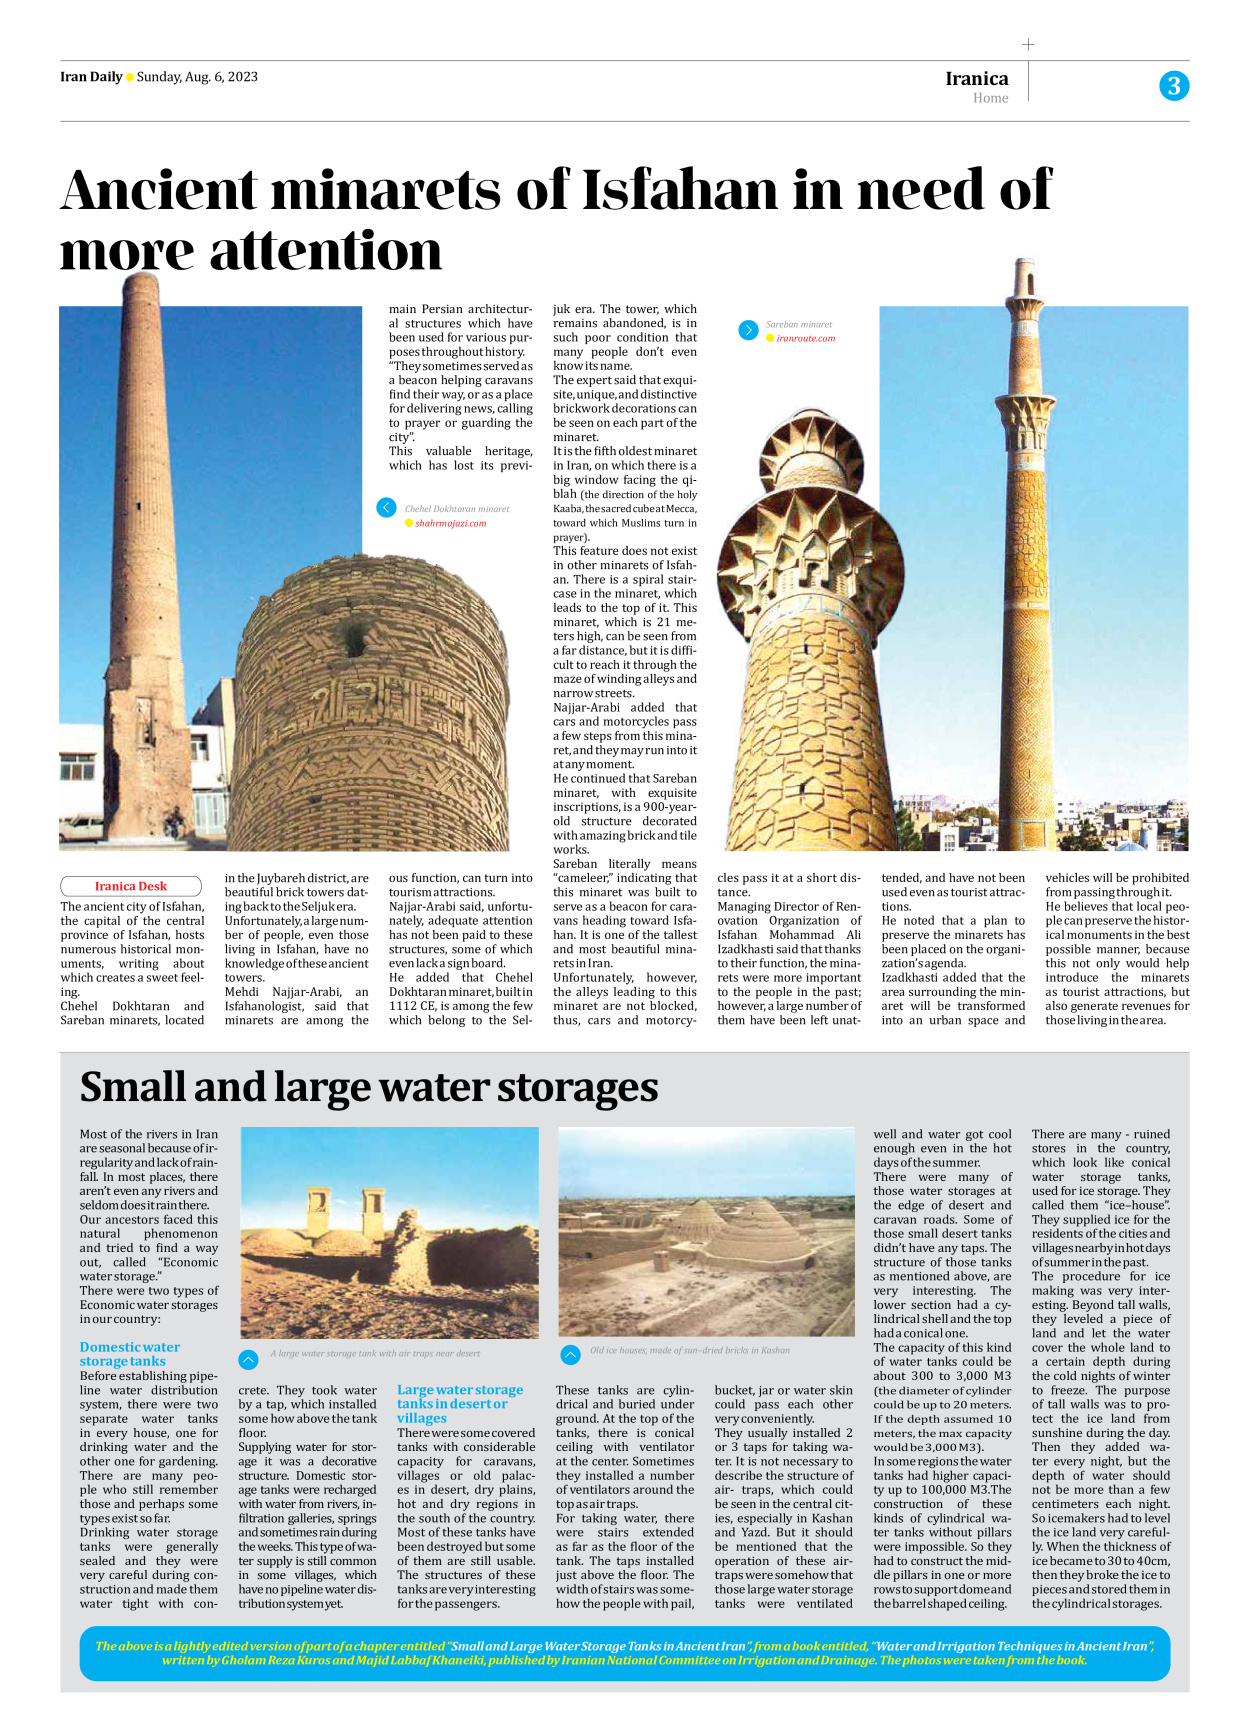 Iran Daily - Number Seven Thousand Three Hundred and Fifty Five - 06 August 2023 - Page 3